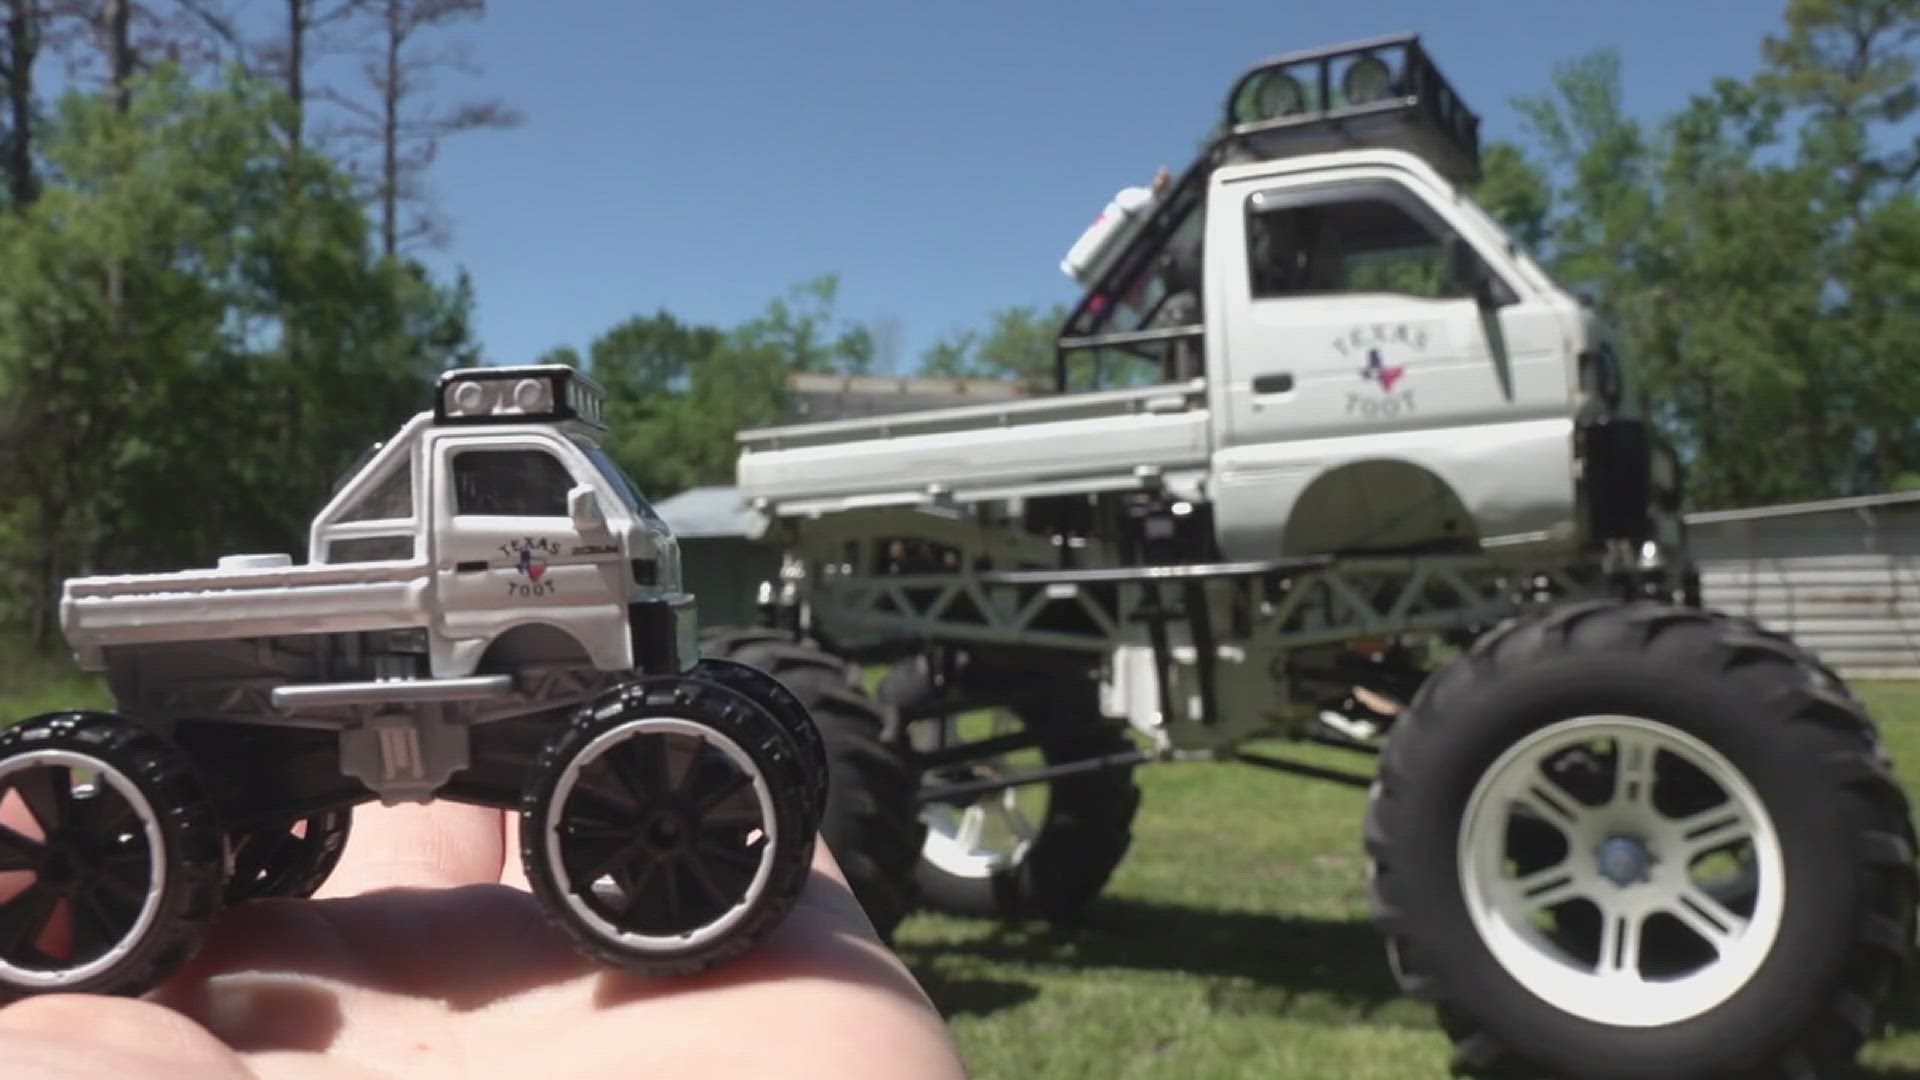 The Hot Wheels version of a mini-monster truck created by a Nederland man is now ready to roll off store shelves.